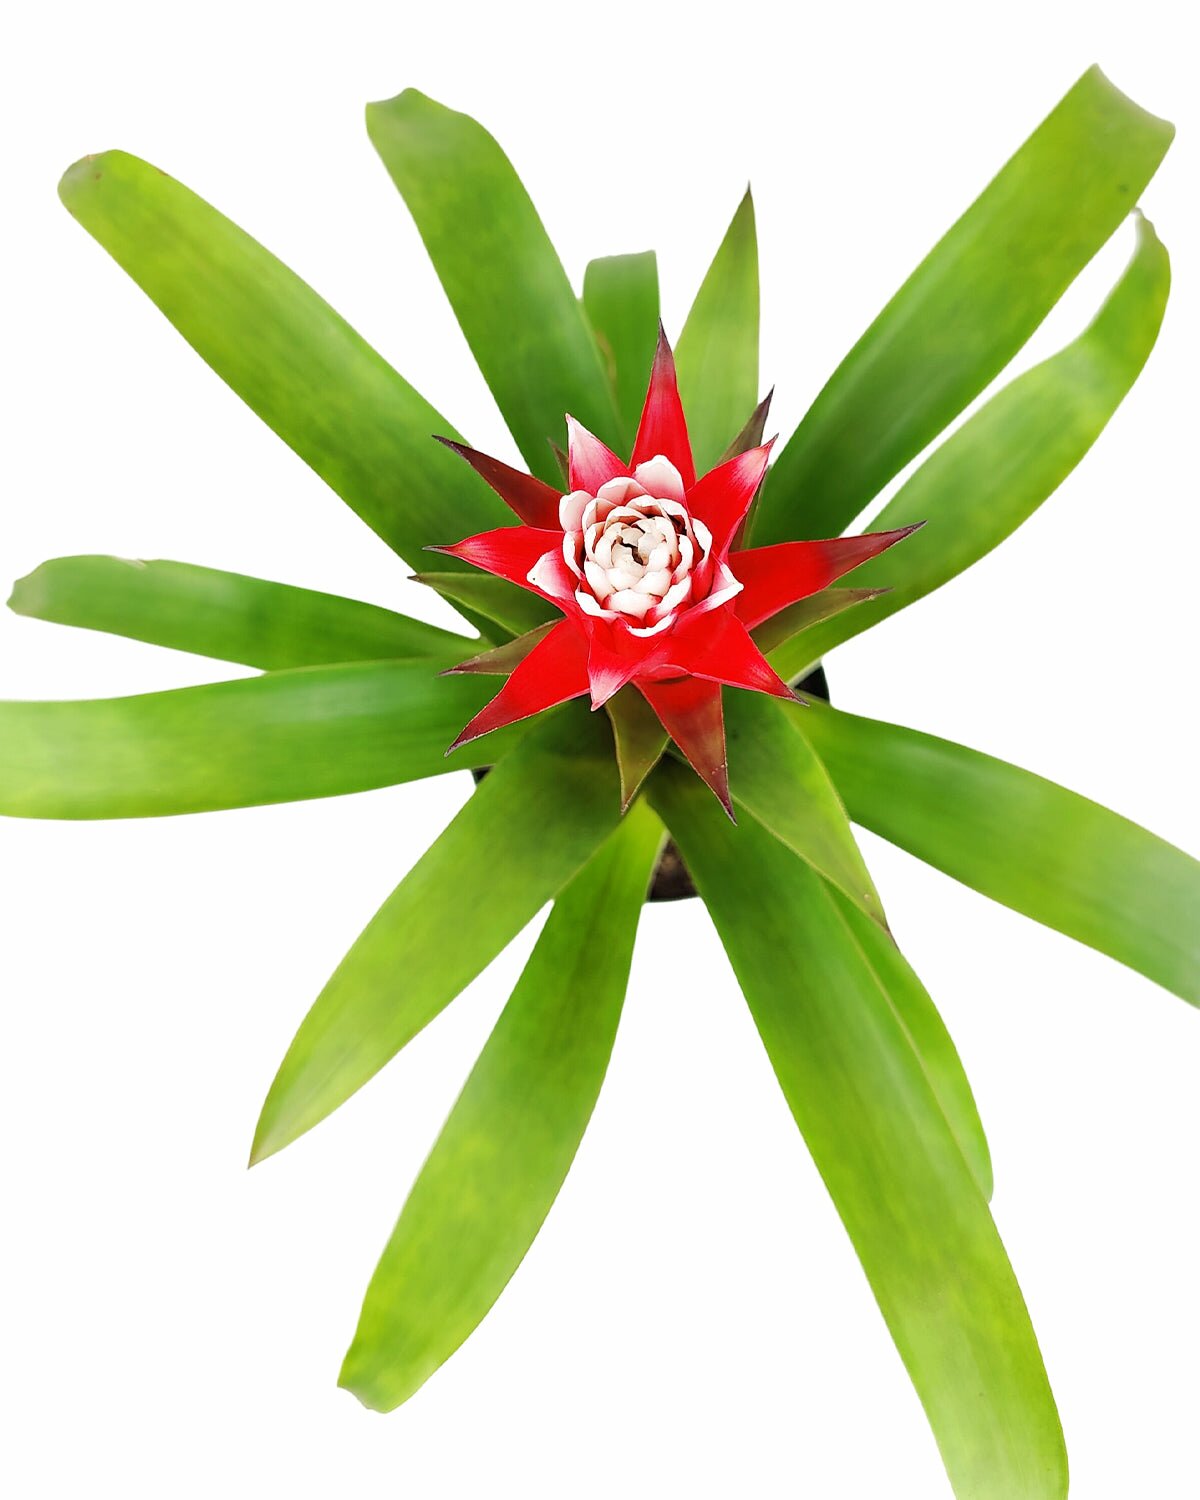 Guzmania hybrid red plant, Guzmania Bromeliad, colorful houseplant, flowering plant for home office, low maintenance houseplant, easy to care plant for beginners